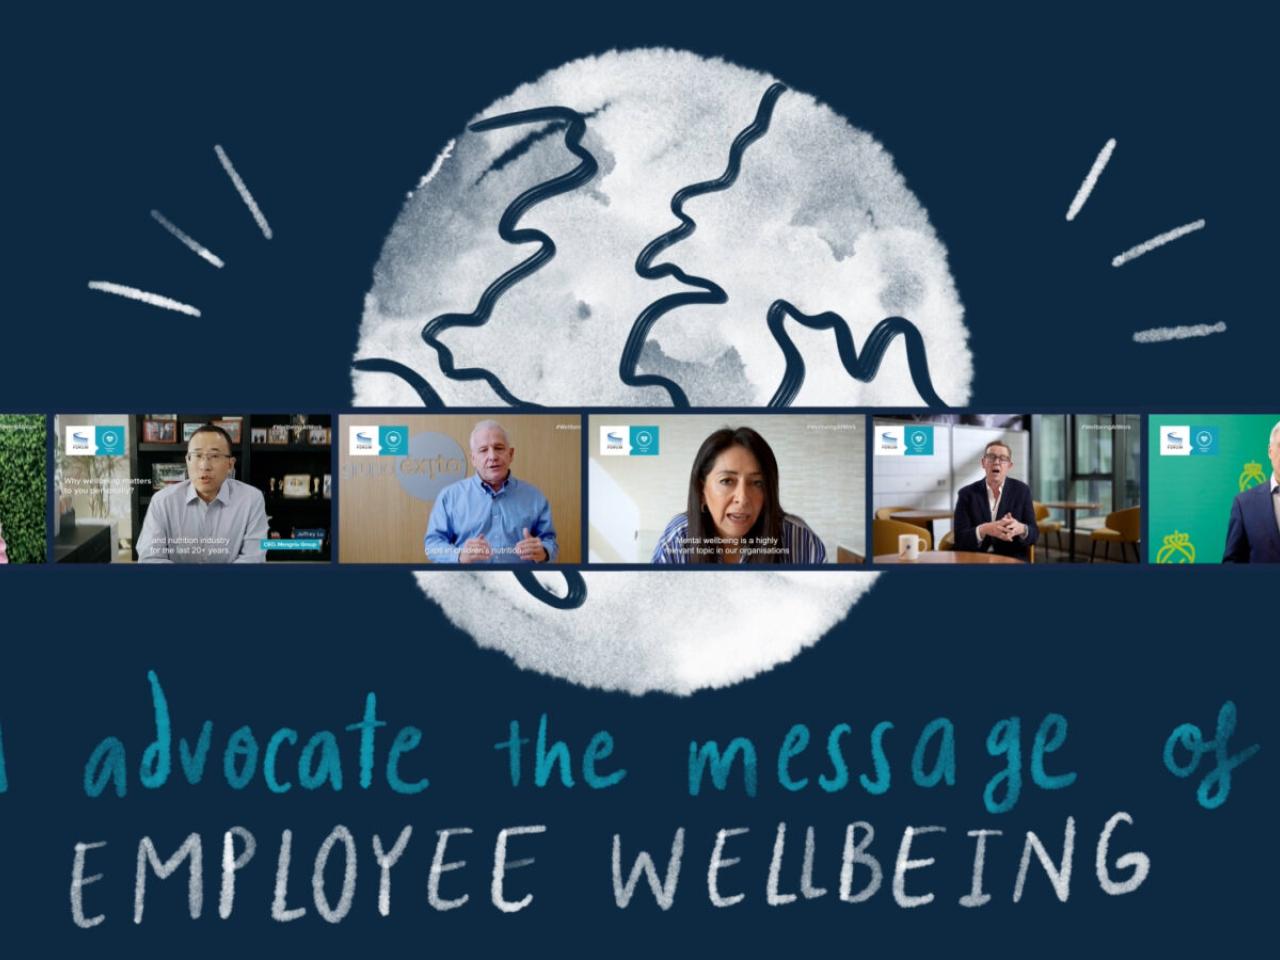 Collage of people in a virtual meeting over a rough sketch of the earth and "advocate the message of employee wellbeing."